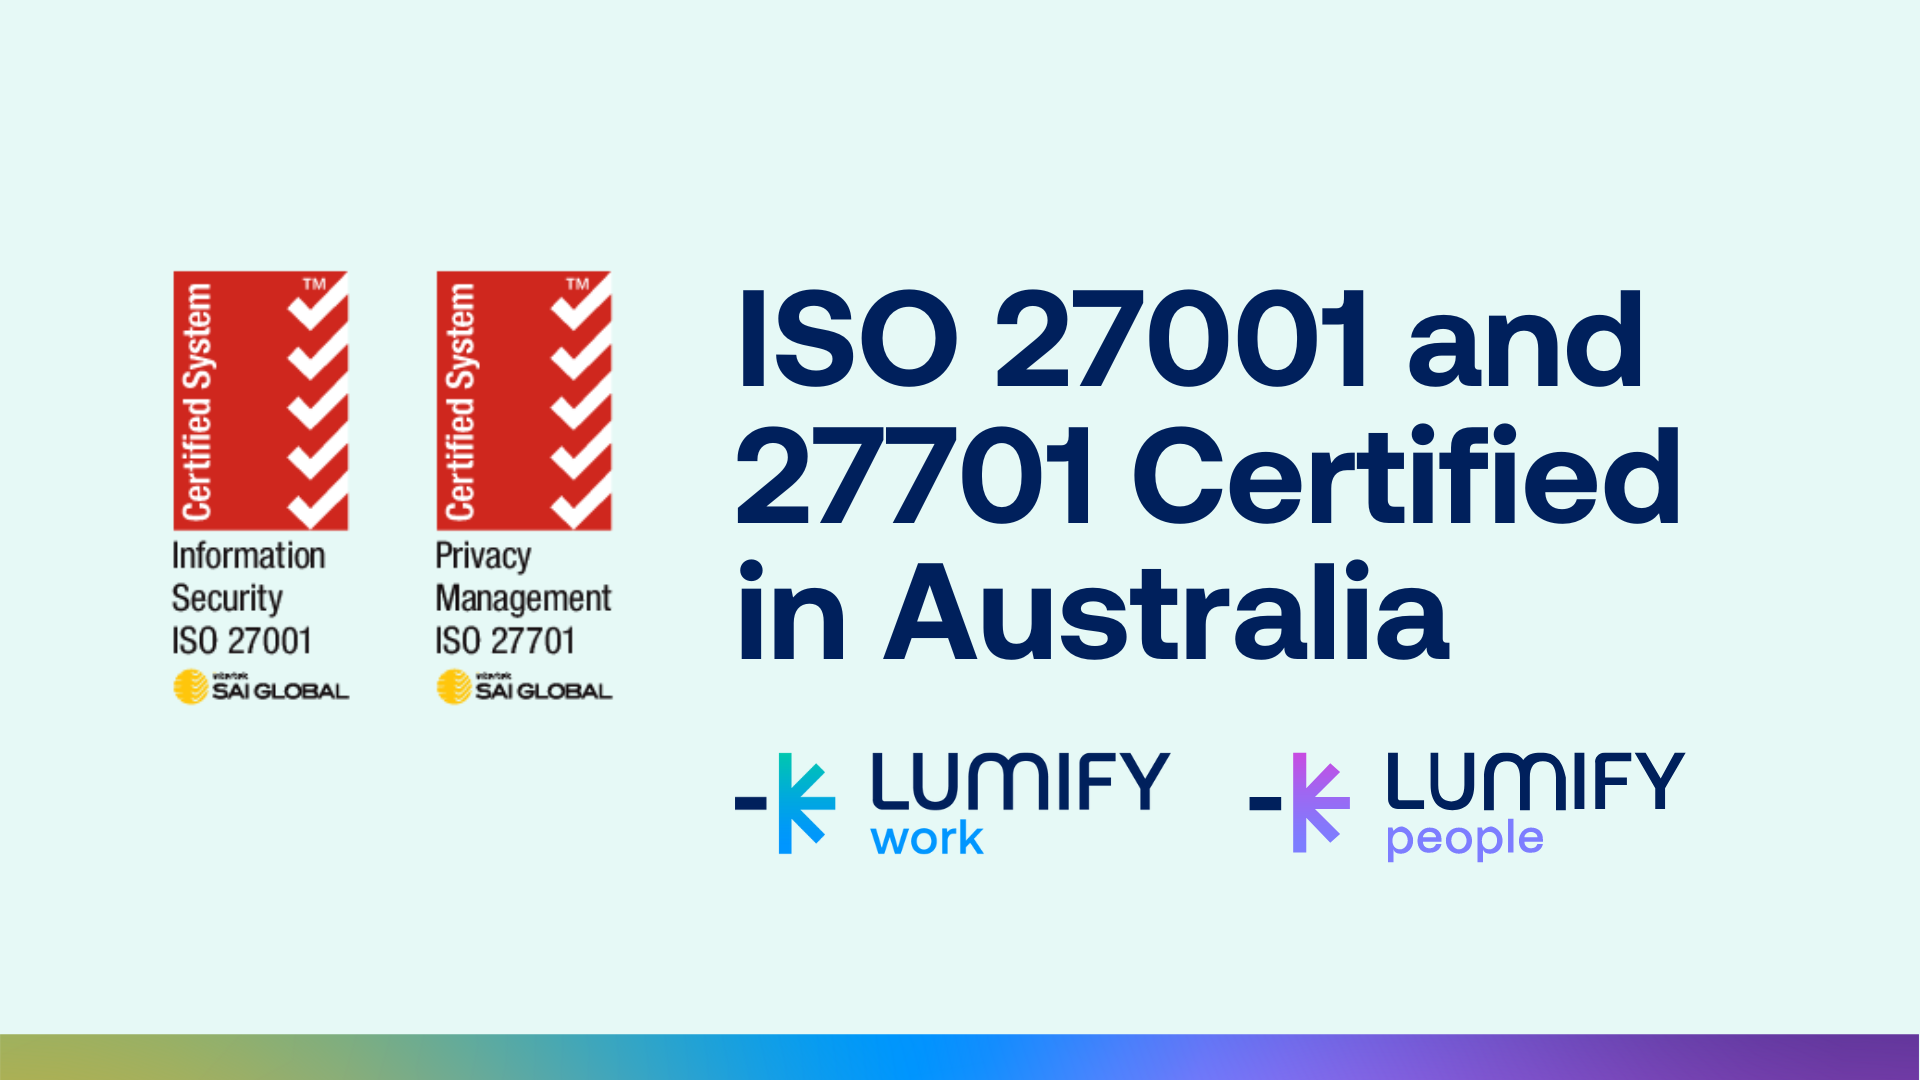 LFY - Group - Blog Share - ISO 27001 and 27701 Certified - How we Bolstered up our Information Systems at Lumify Work Australia & Lumify People